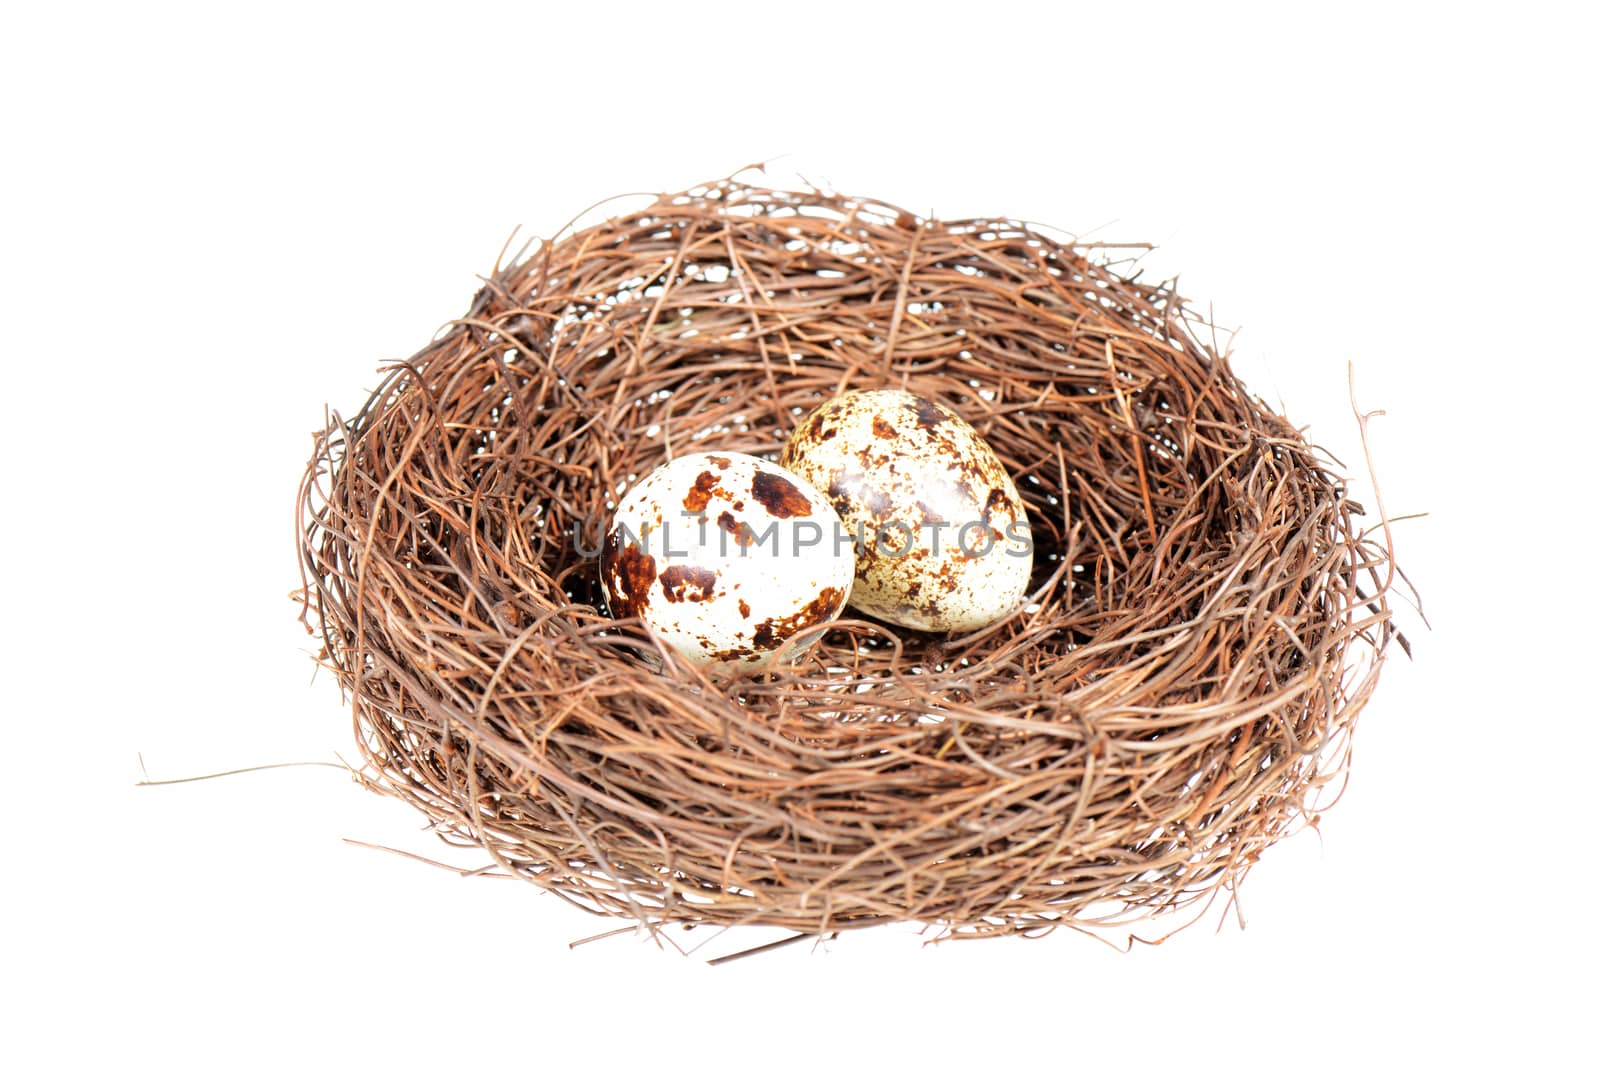 Bird's nest and quail eggs isolated on a white background